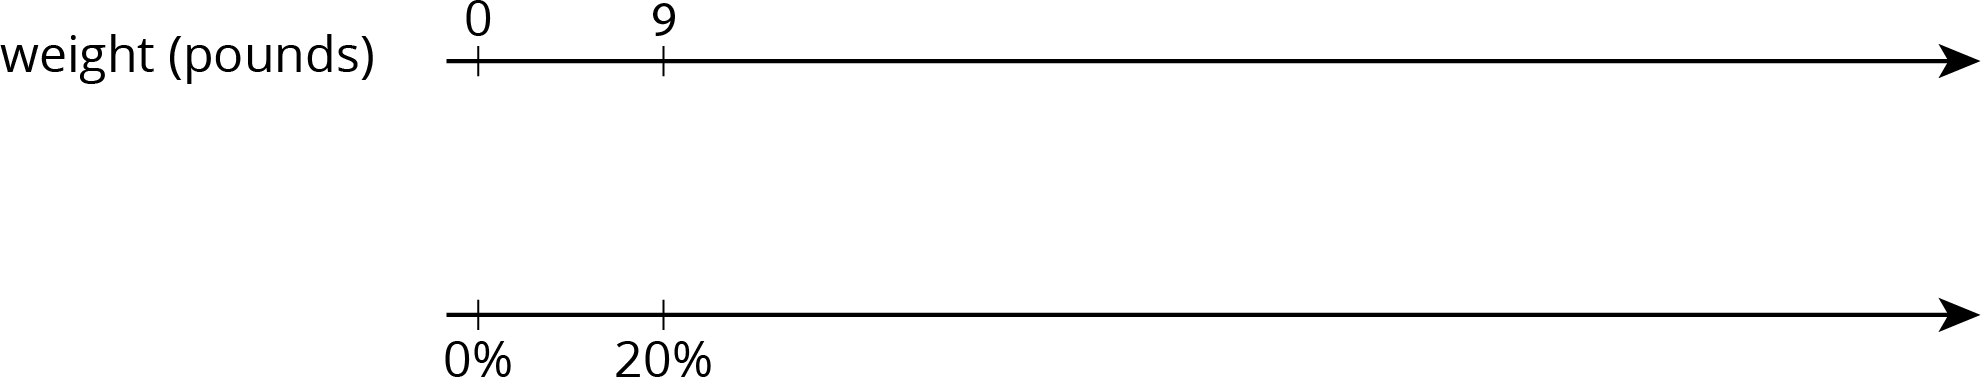 A double number line for “weight in pounds” with 2 tick marks. The top number line has the number 0 on the first tick mark and 9 on the second. The bottom number line has 0 percent on the first tick mark and 20 percent on the second.